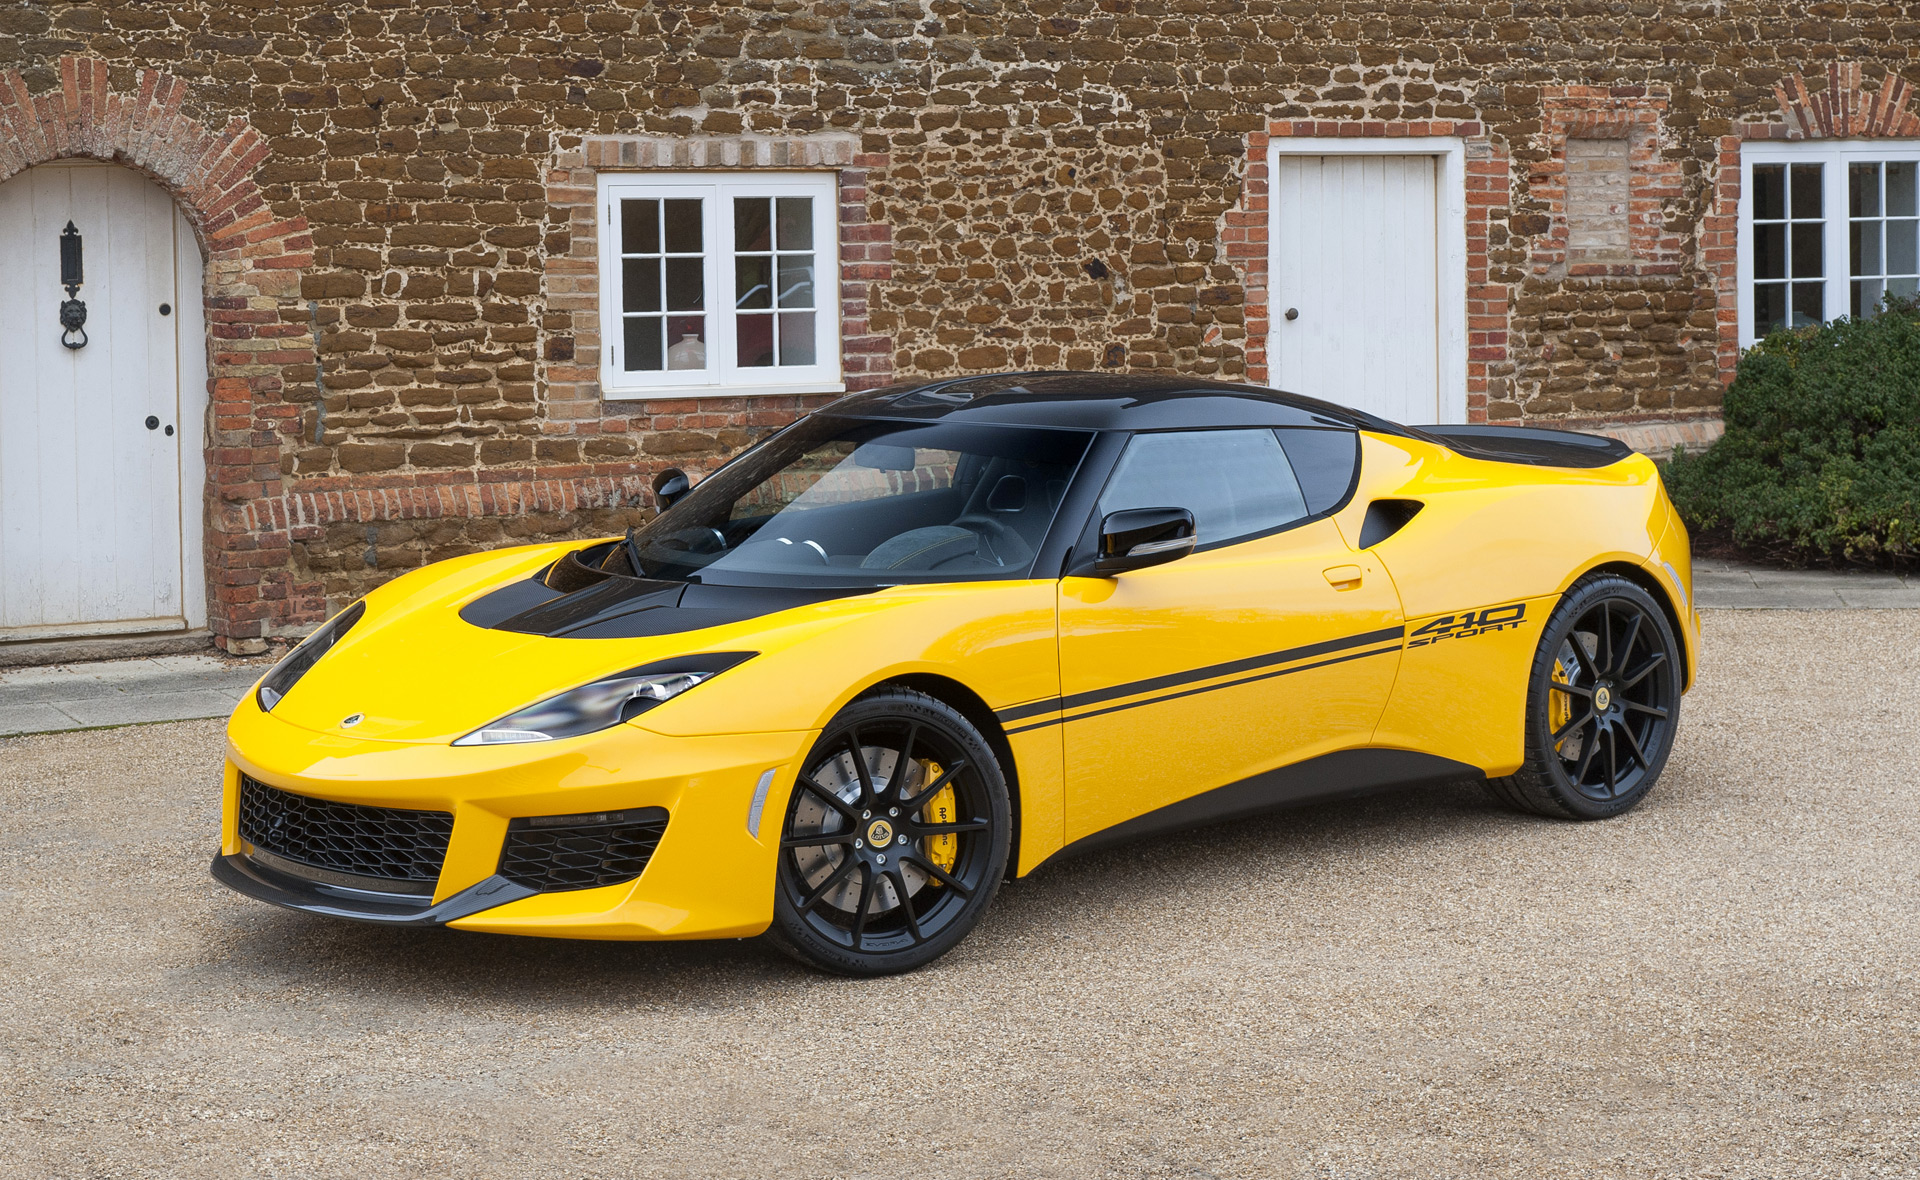 2017 Lotus Evora Sport 410 ups the power and drops the weight